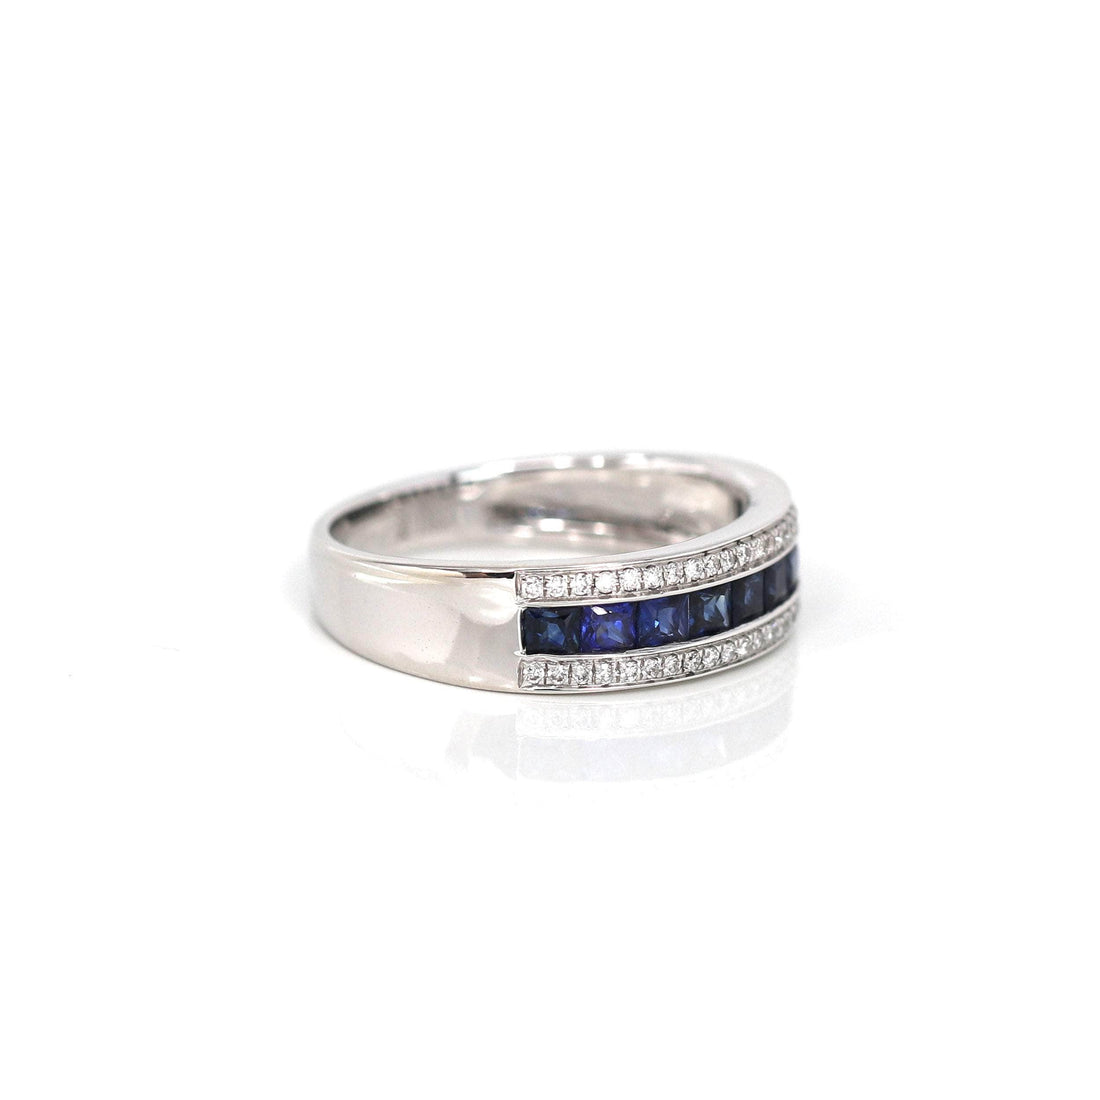 Baikalla Jewelry Gold Sapphire Ring 5 18k White Gold Natural Blue Sapphire Channel Set Band Ring with Diamonds